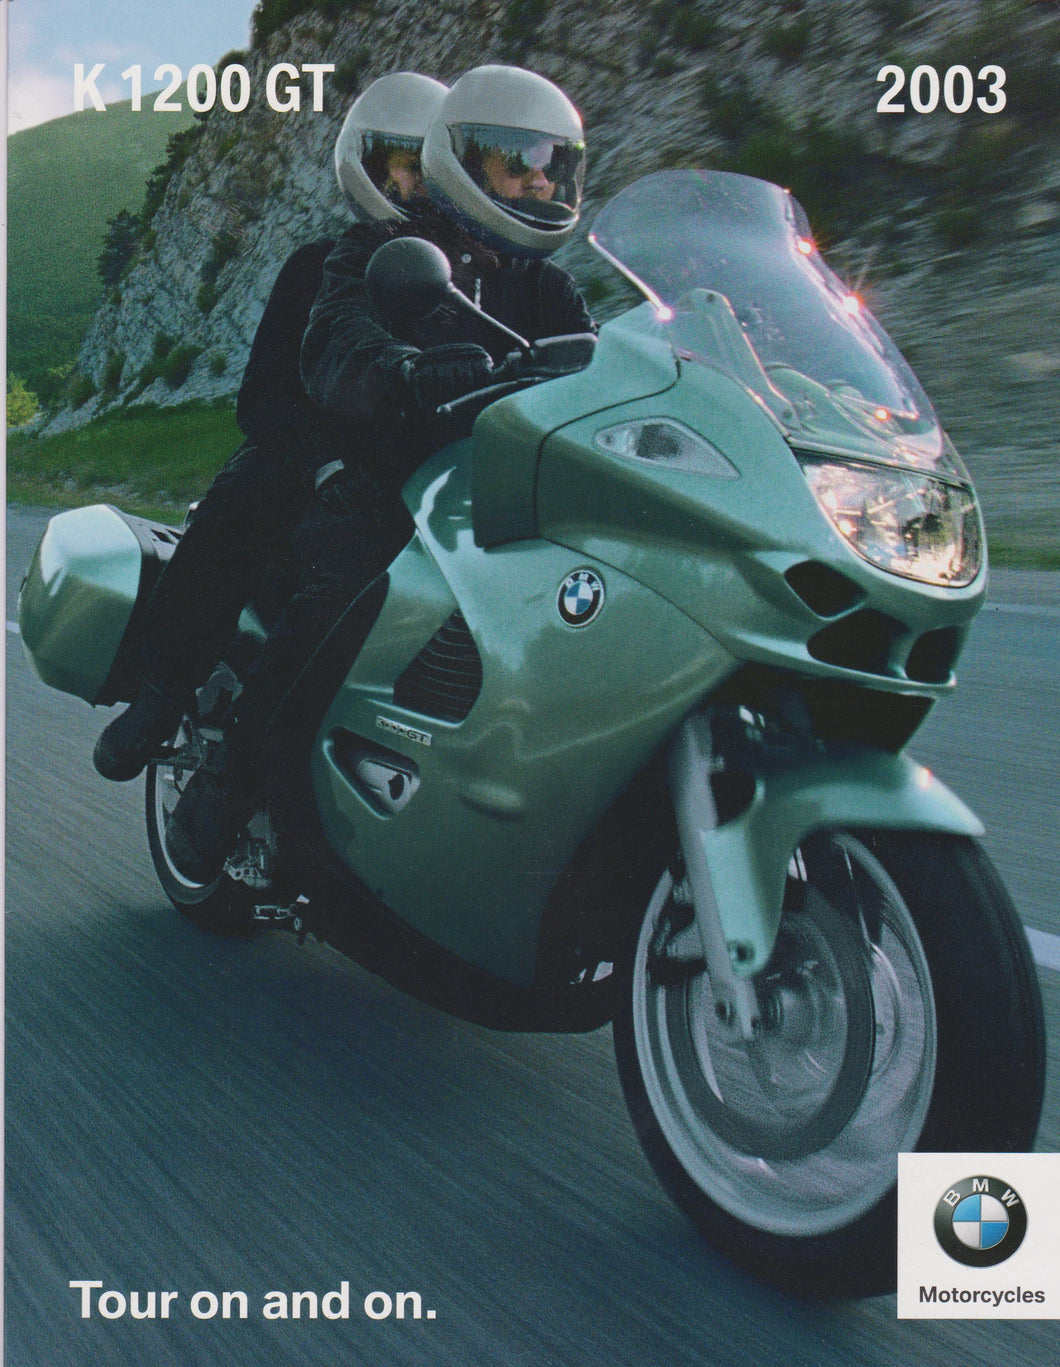 Brochure - K 1200 GT 2003 Tour on and on.